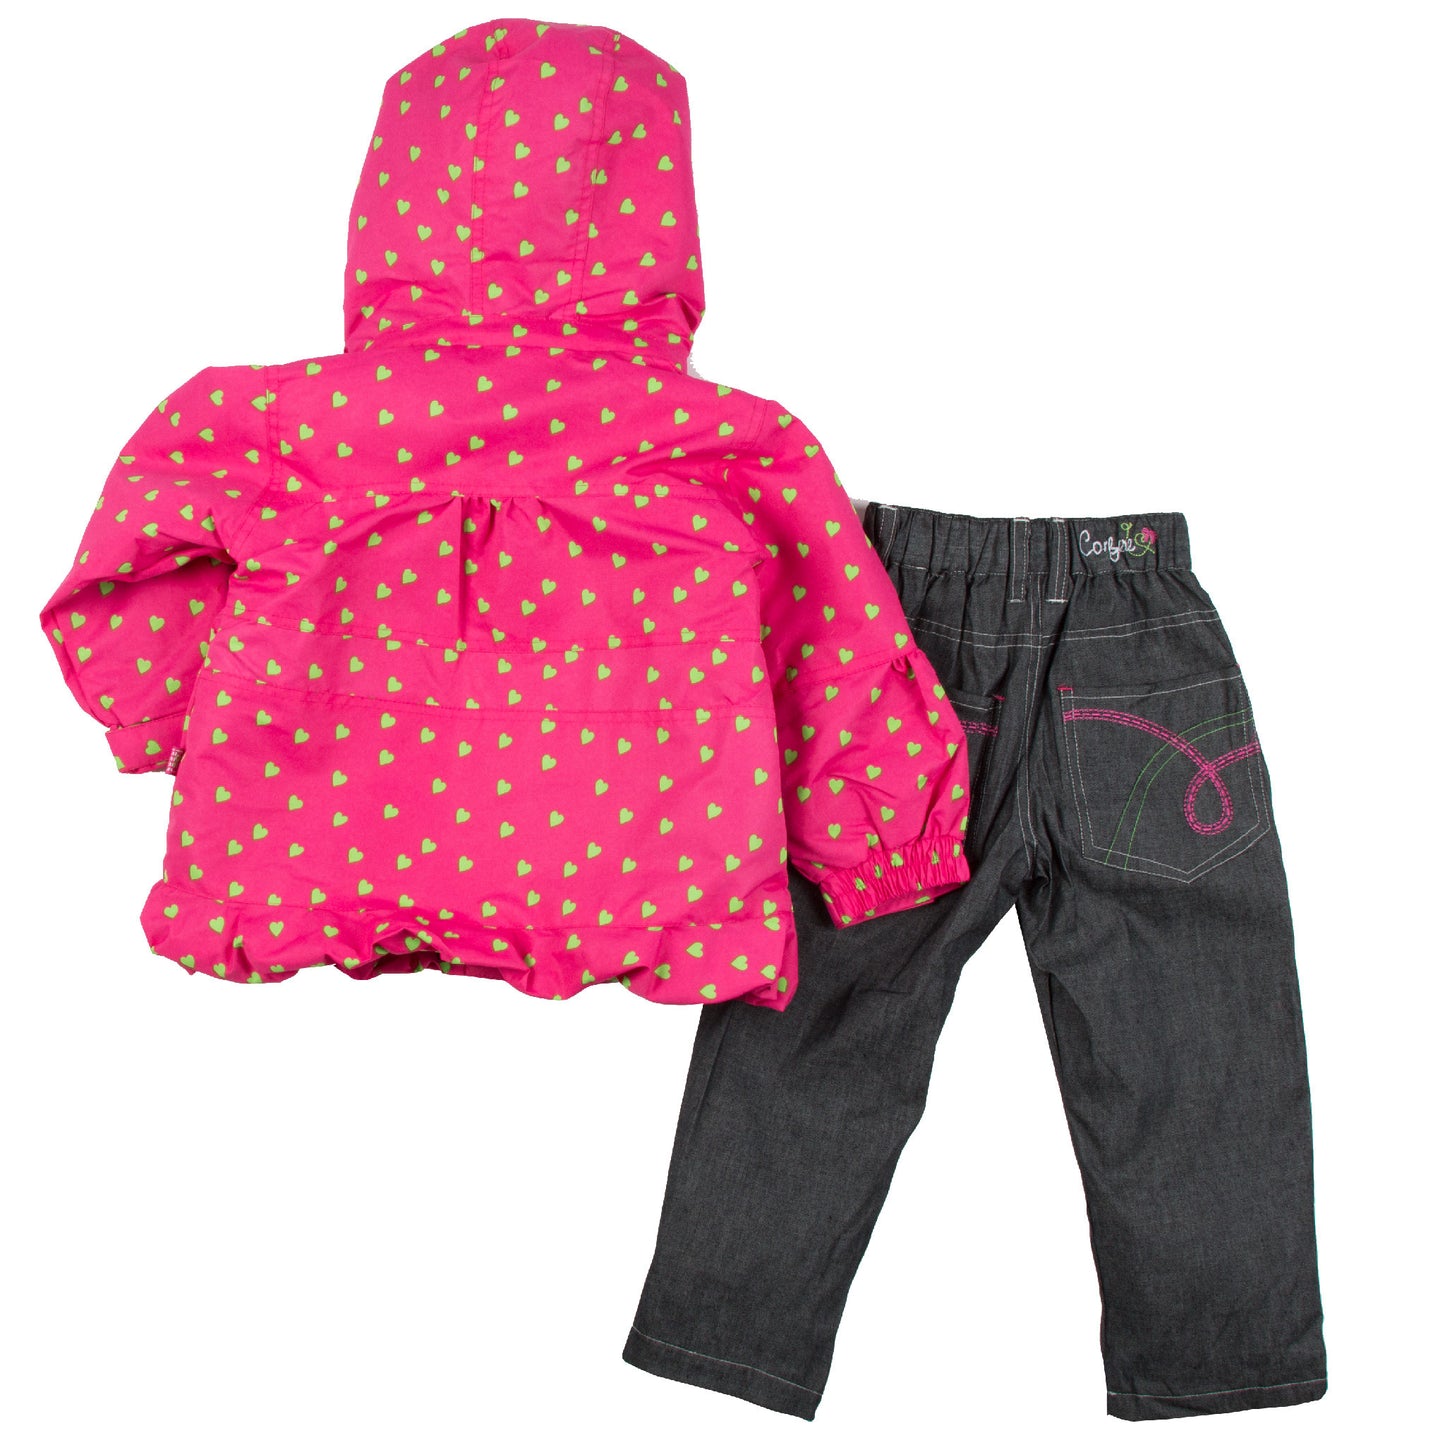 Small Hearts Girl's 3-in-1 Set